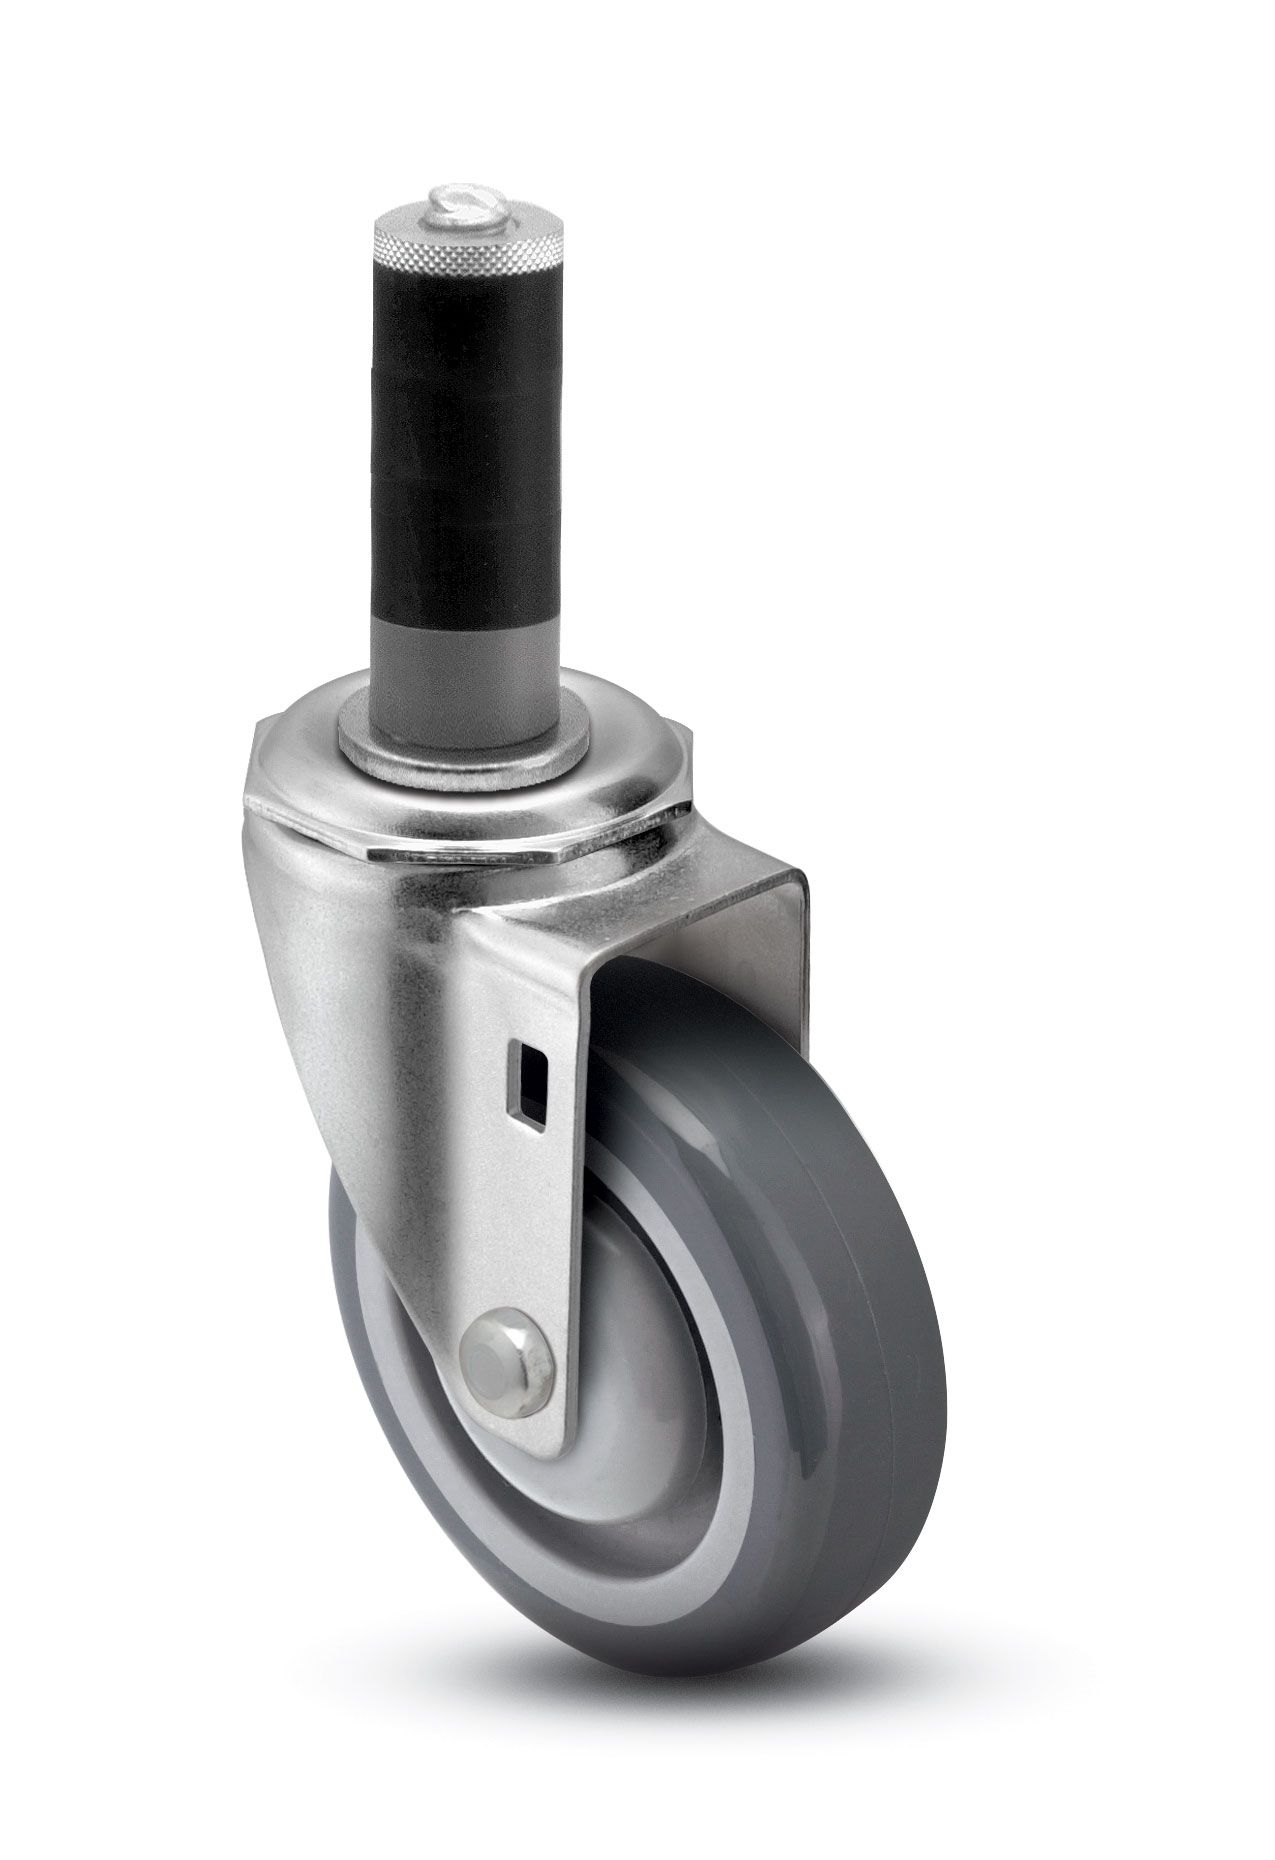 Caster; Swivel; 5" x 1-1/4"; TPR Rubber; Expandable Adapter (1-1/4" I.D. x 1-5/16"  ID tubing); Zinc; Precision Ball Brng; 300#; Total Lock; Dust Cover (Item #65057)